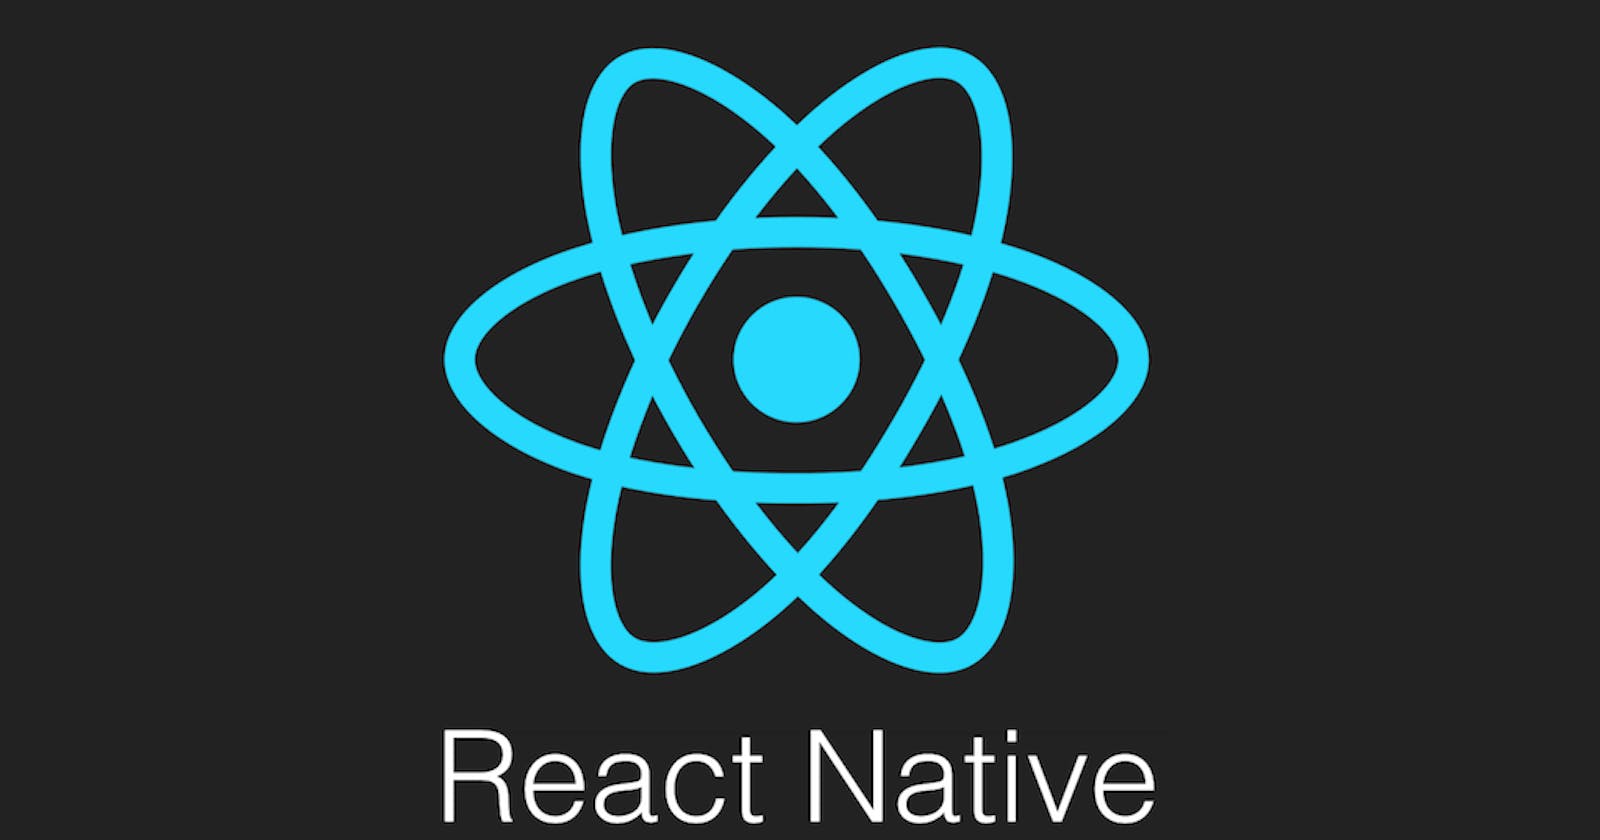 Building Applications with React